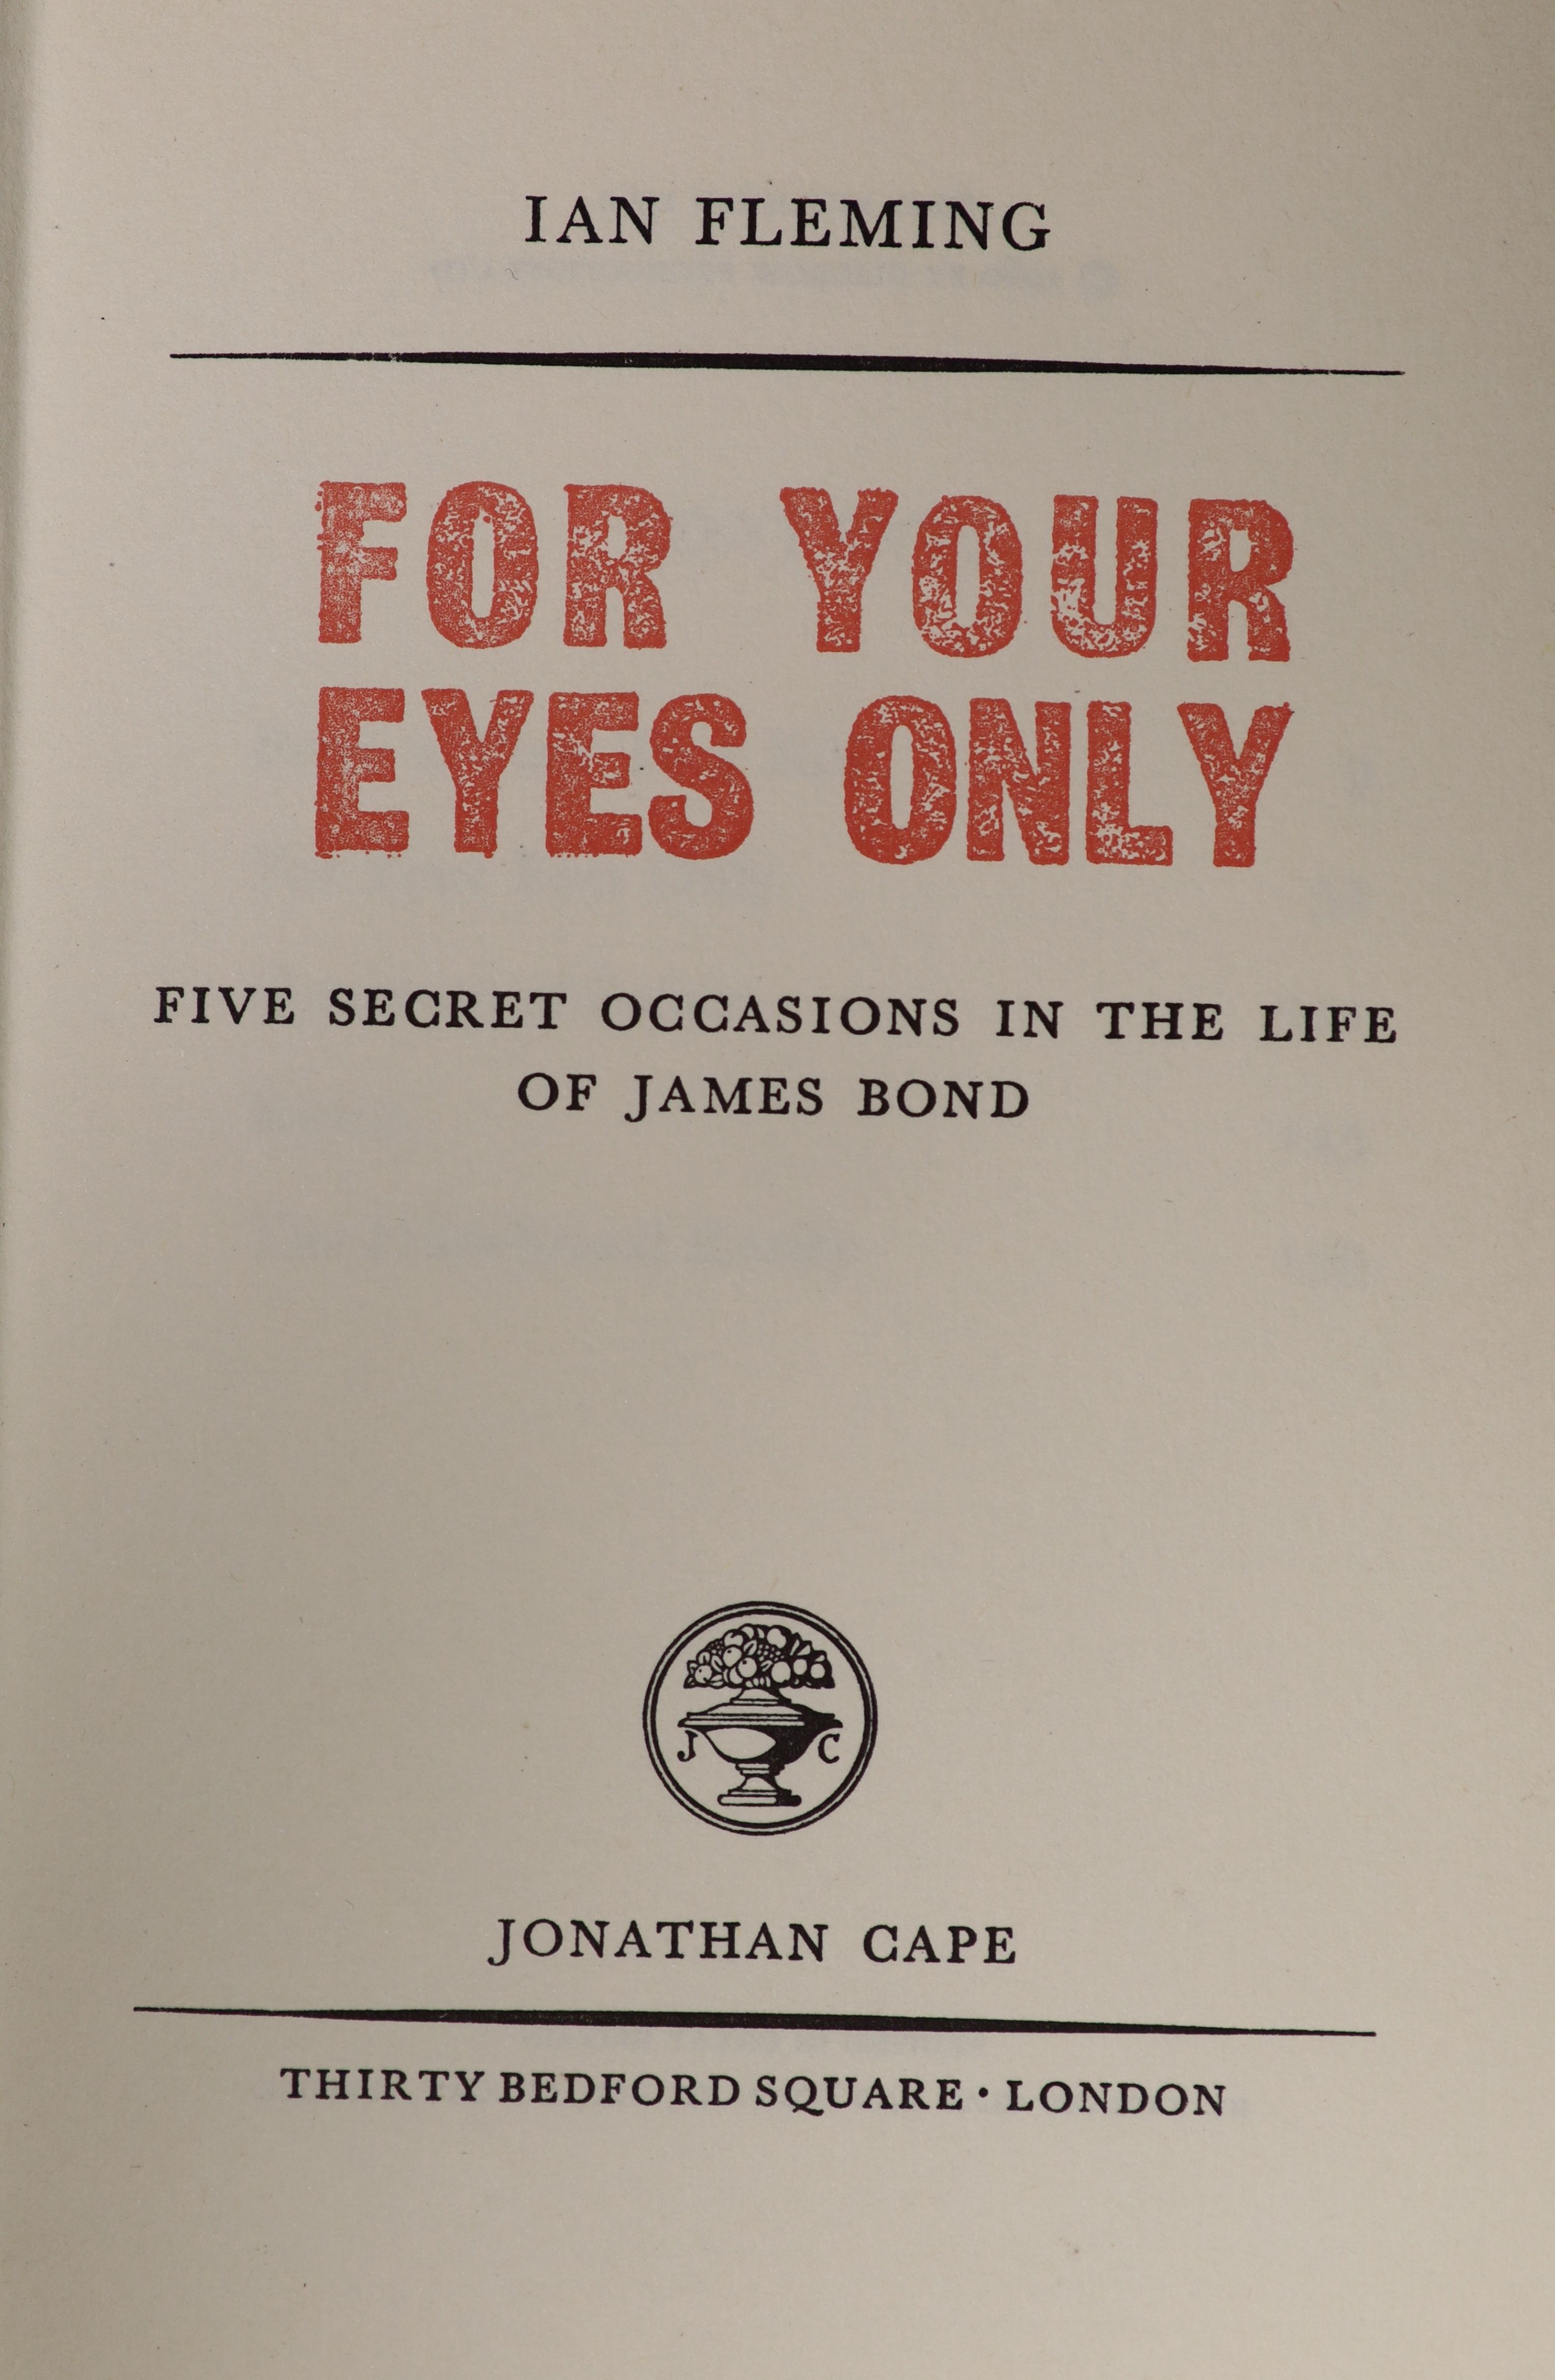 Fleming, Ian - For Yor Eyes Only, 1st edition, 1st impression, original cloth with biro inscribed date to front fly leaf, in clipped d/j designed by Richard Chopping, London, 1960